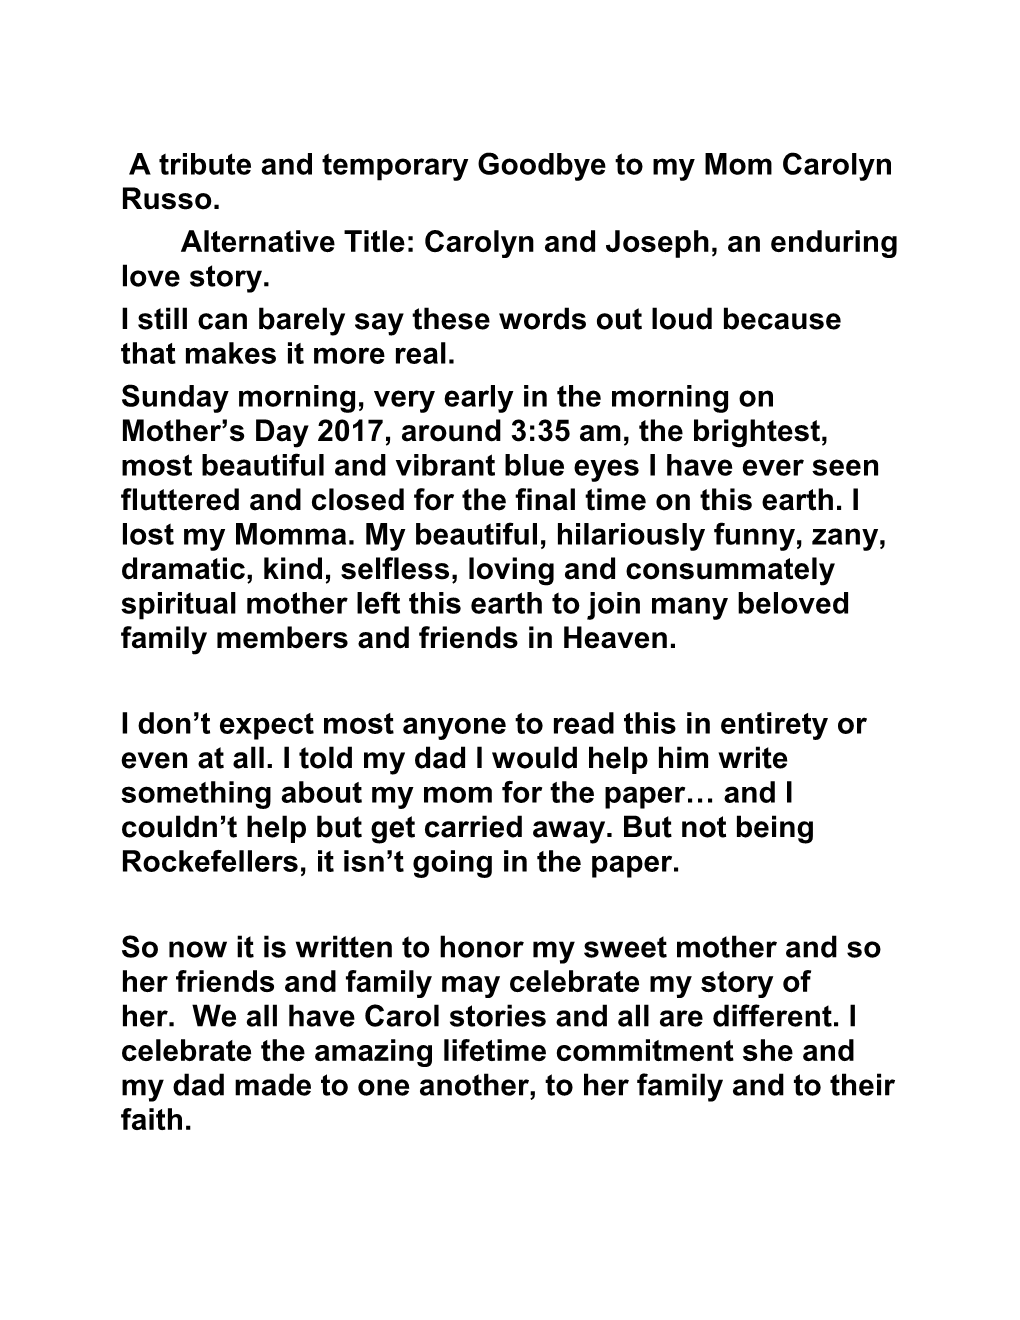 A Tribute and Temporary Goodbye to My Mom Carolyn Russo